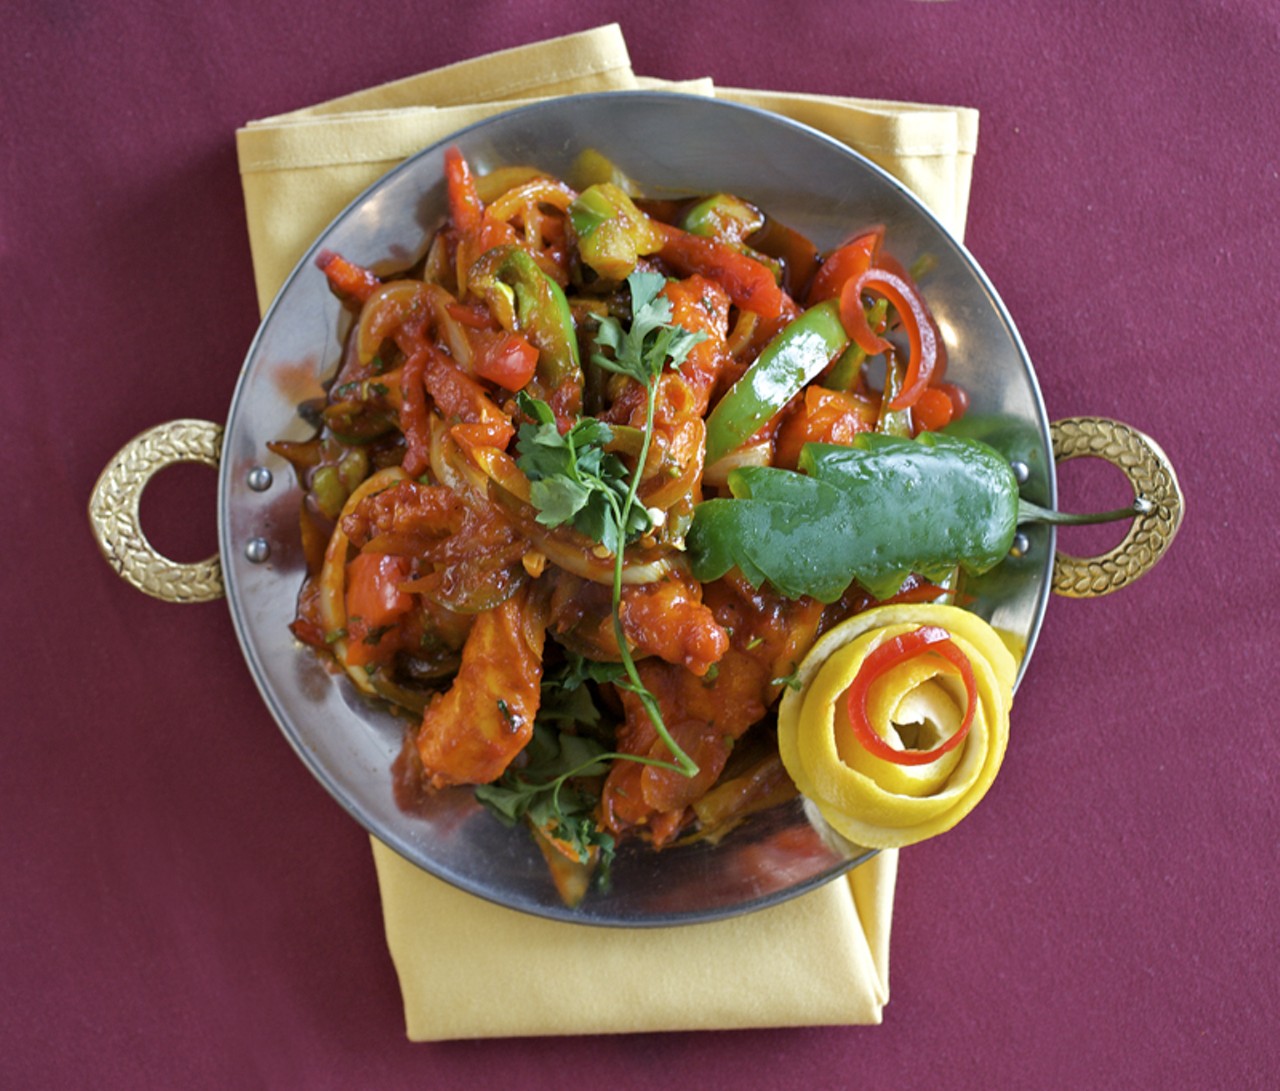 Best Indian
Haveli
9720 Page Avenue, 314-423-7300
Readers love this north county Indian restaurant for its delicious renderings of all the classics from the subcontinent &#151; curries, biryanis and vindaloos, all expertly prepared. Not sure what to order? Stop by at lunch and try the buffet. You&#146;ll find a favorite new dish in no time. Photo by Jennifer Silverberg.